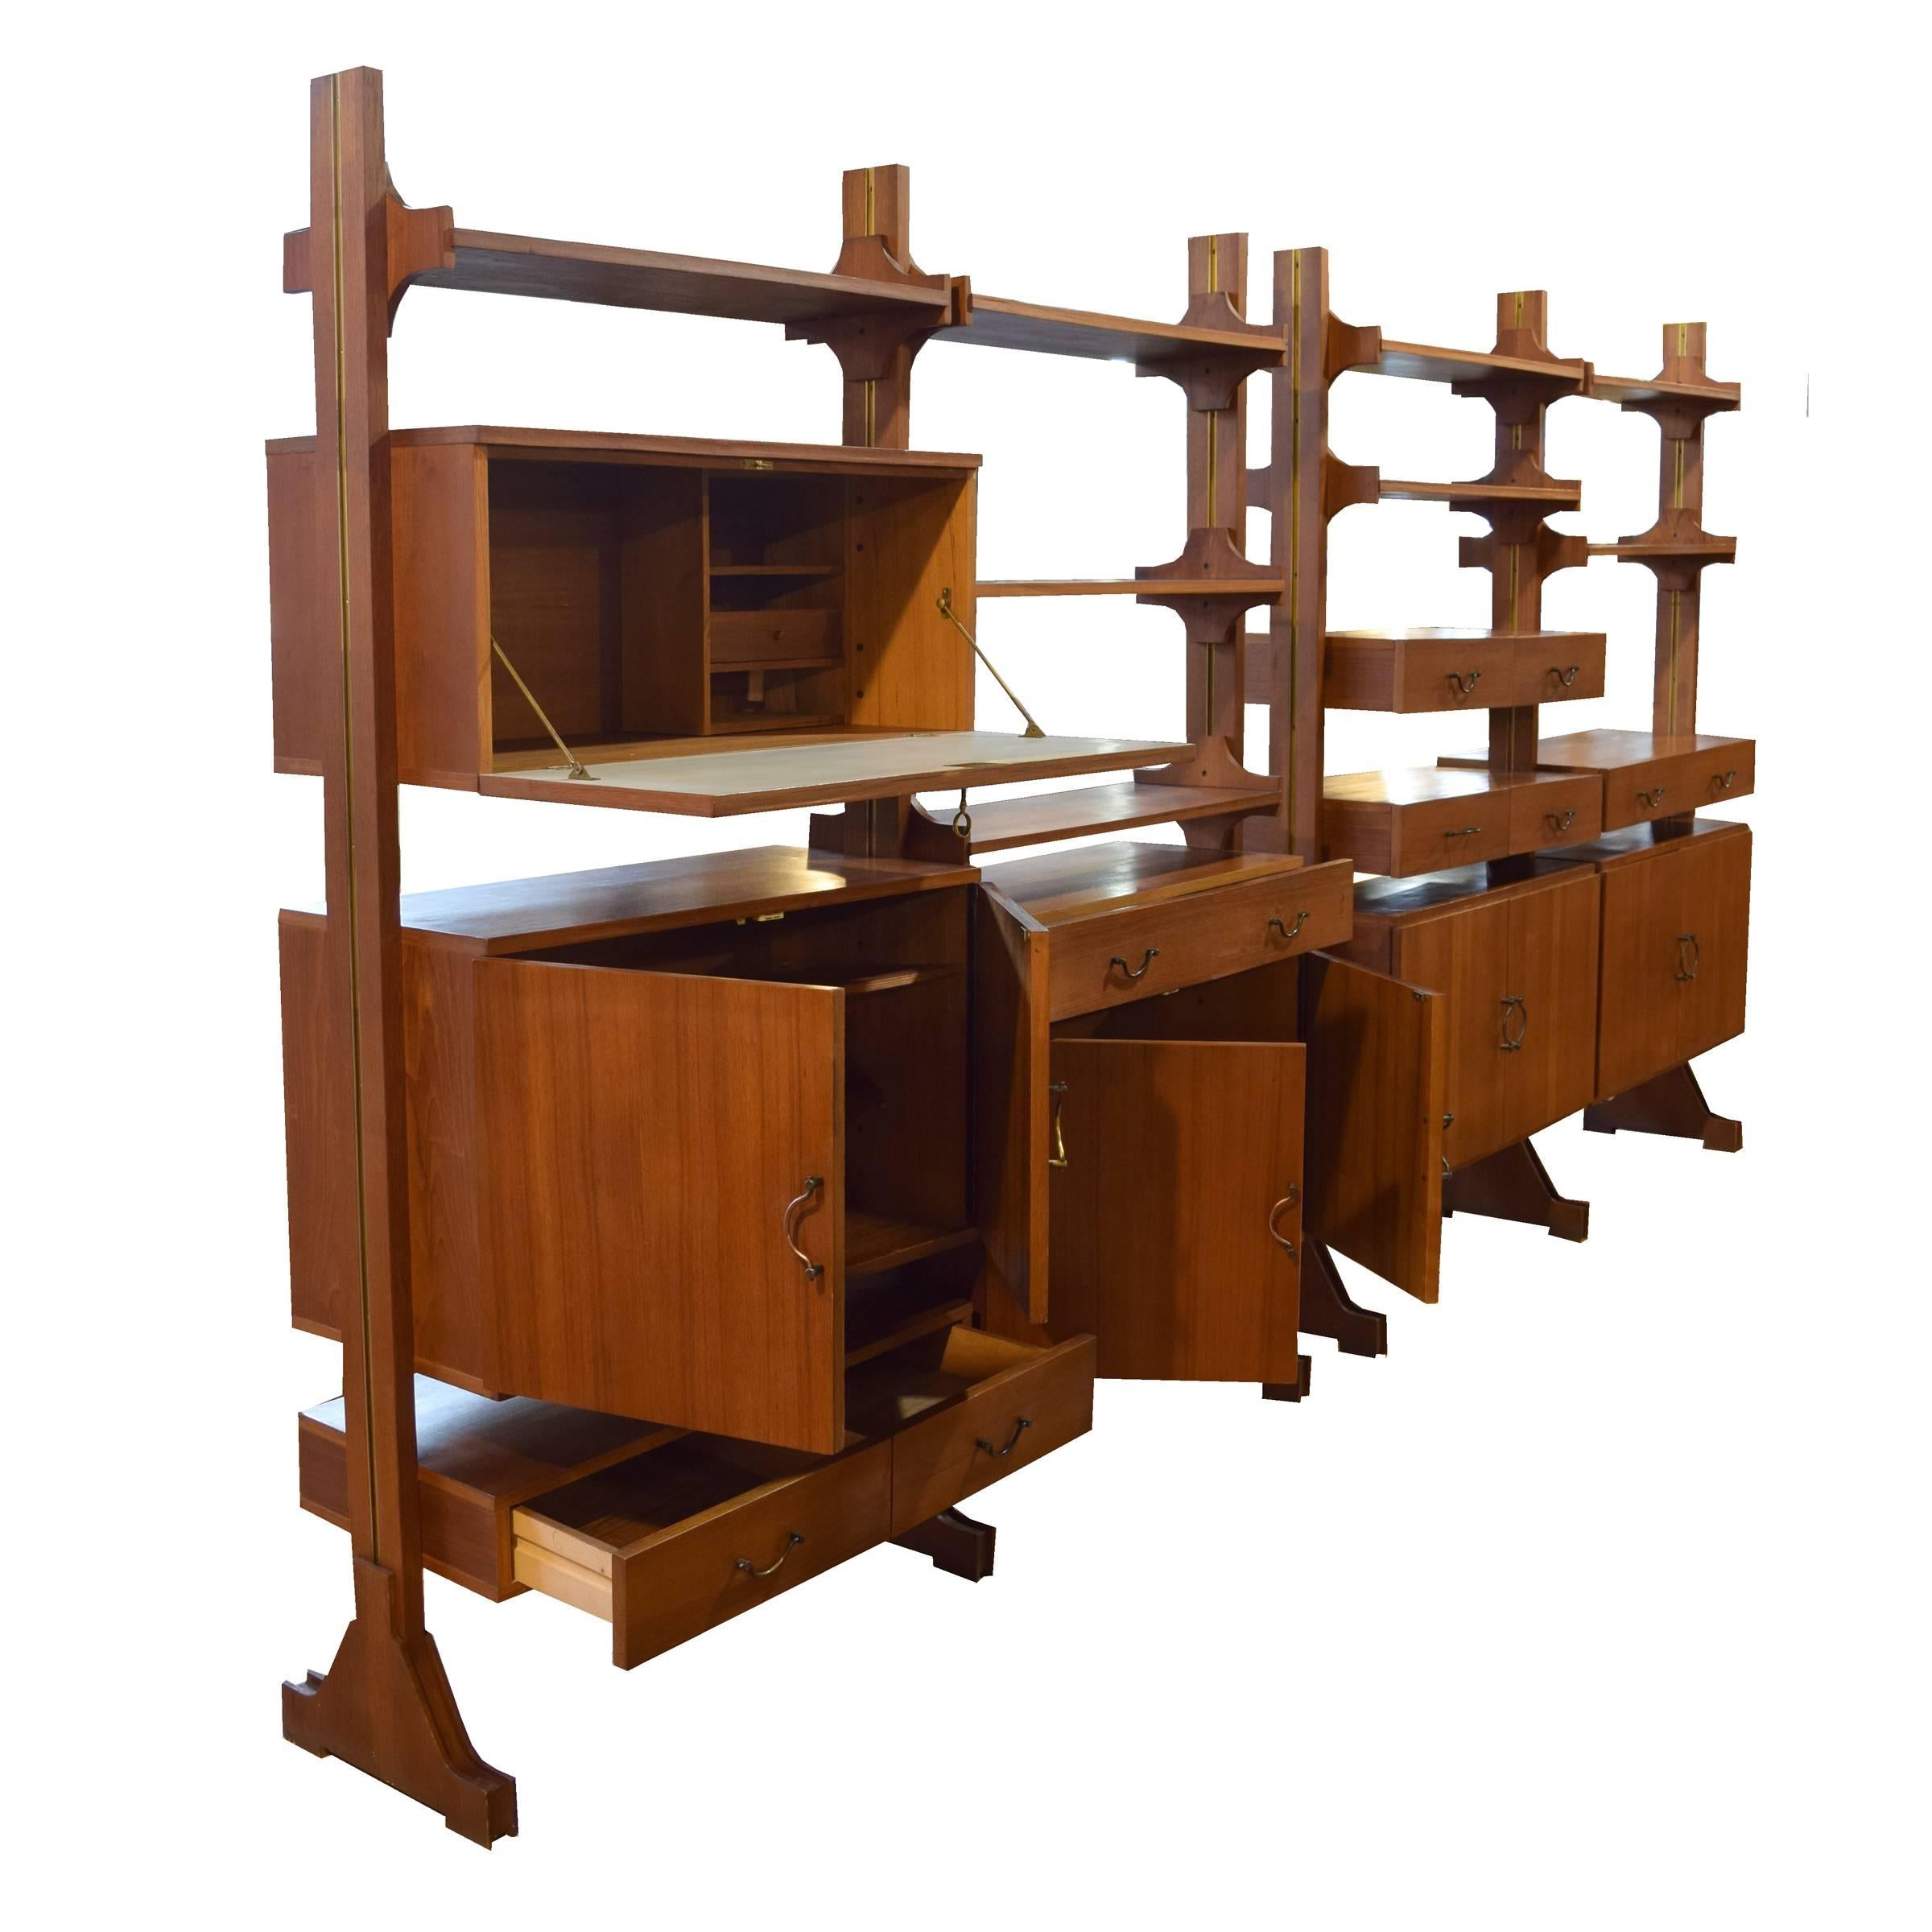 An incredible Italian Modern freestanding two section wood shelving unit with adjustable cabinets, drawers and shelves, all with brass hardware, circa 1960.
Width listed is for each section.